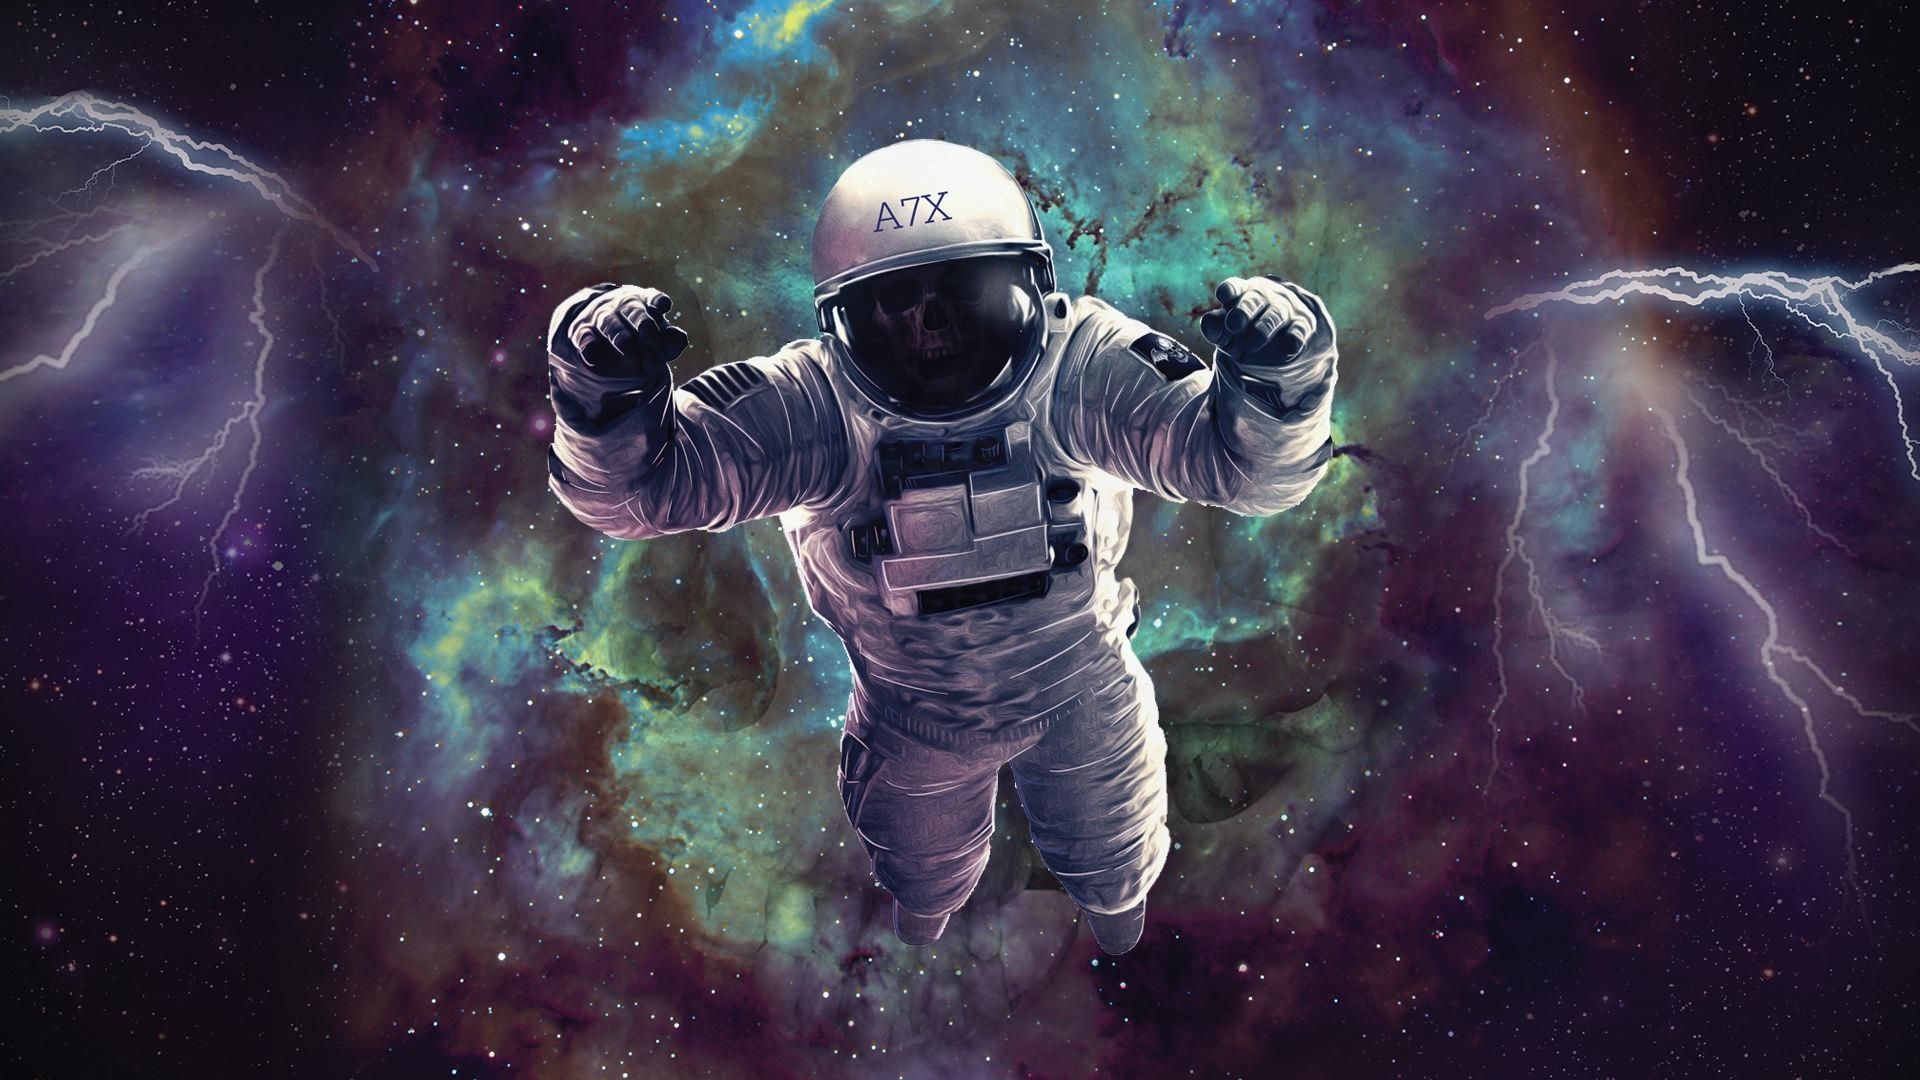 A space man in an astronaut suit is floating through the sky - Astronaut